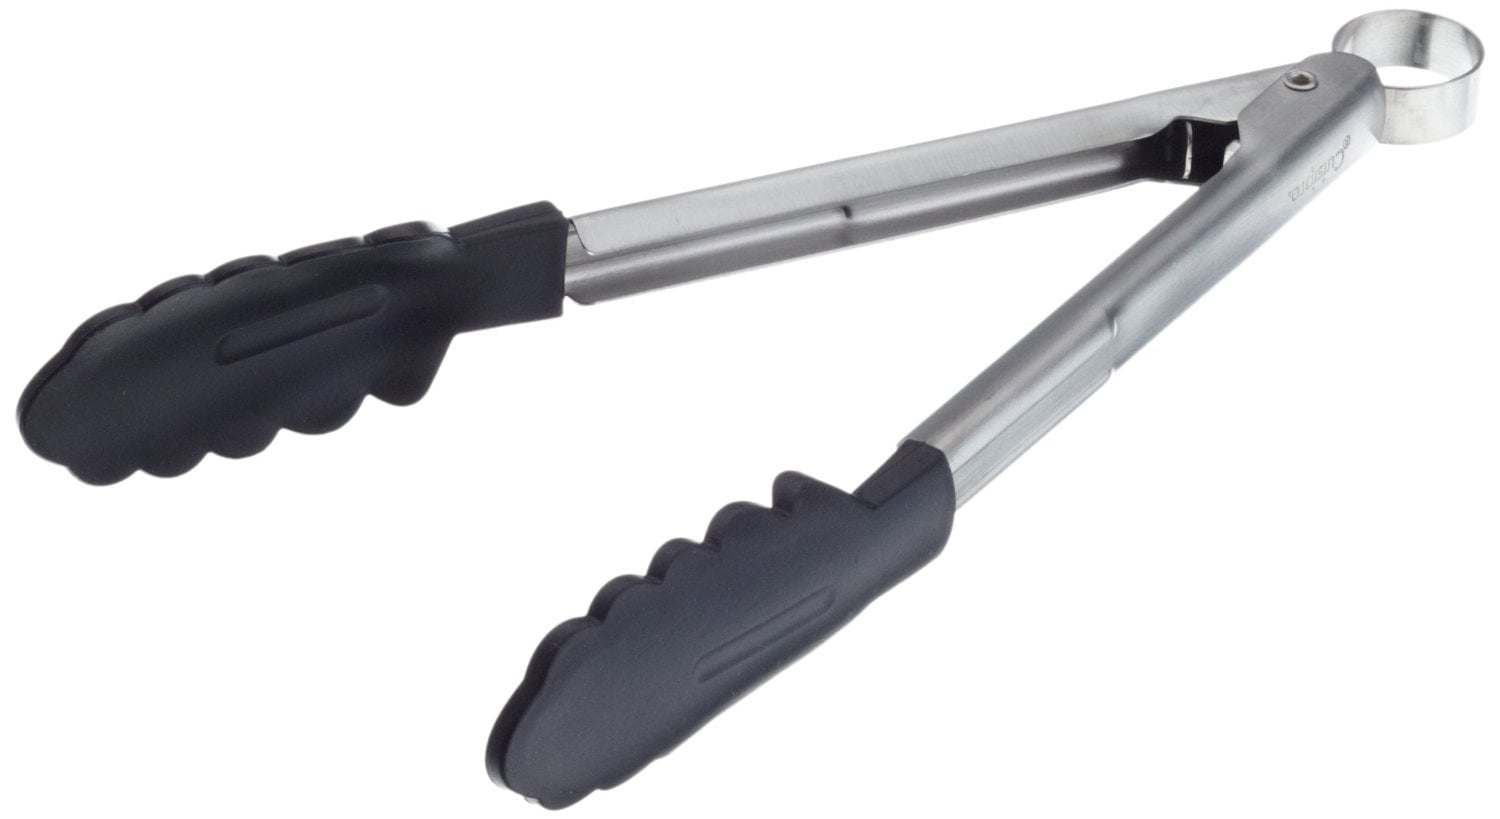 Buy Locking Tongs silicone 30 cm11.8 in. - online at RÖSLE GmbH & Co. KG